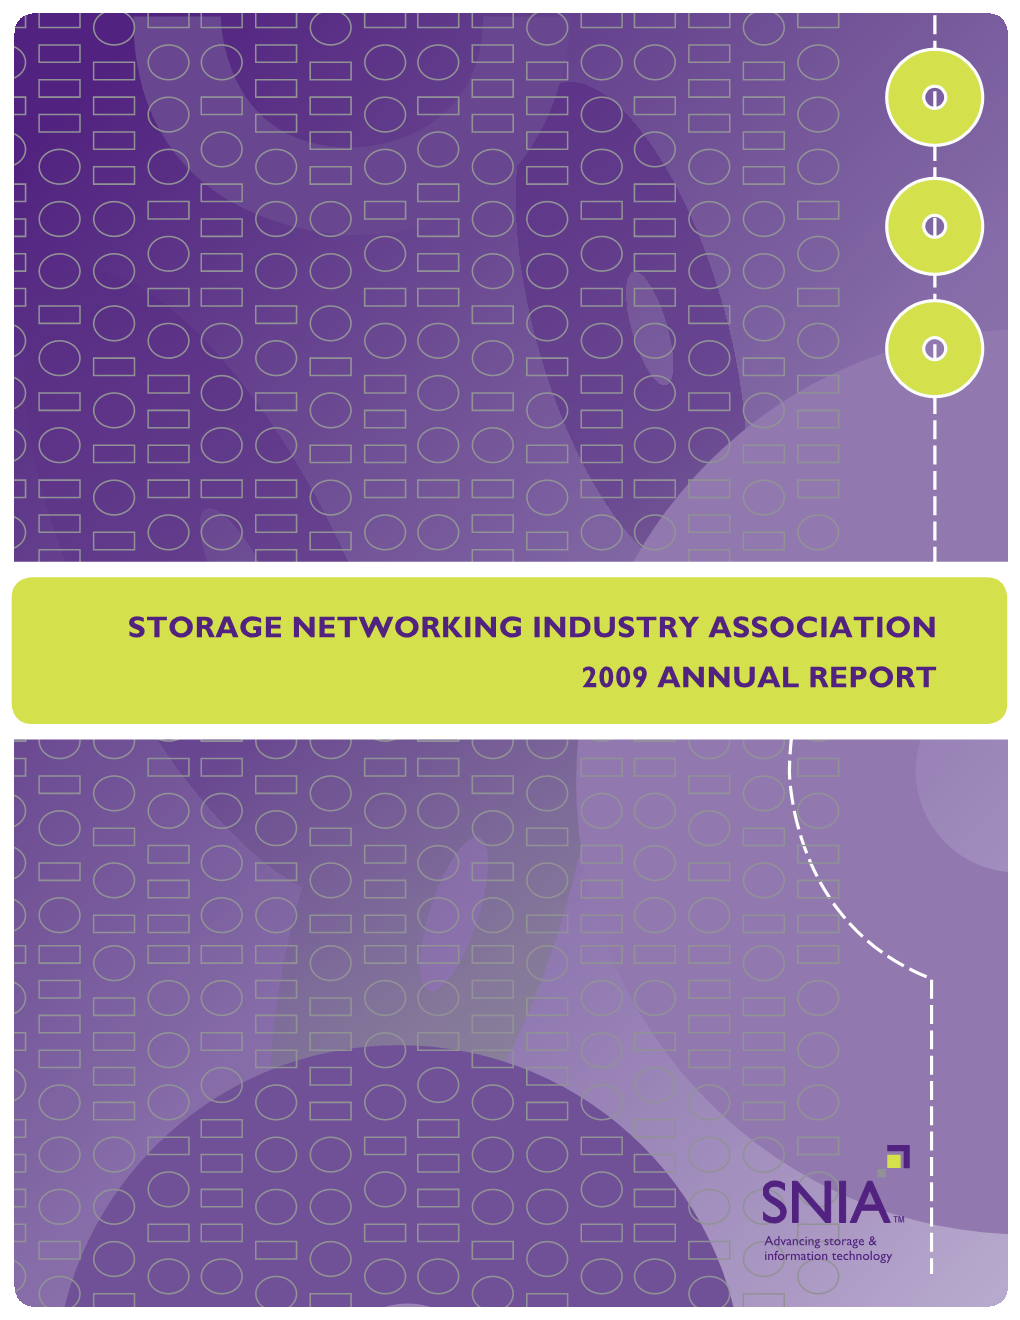 Storage Networking Industry Association 2009 Annual Report Table of Contents